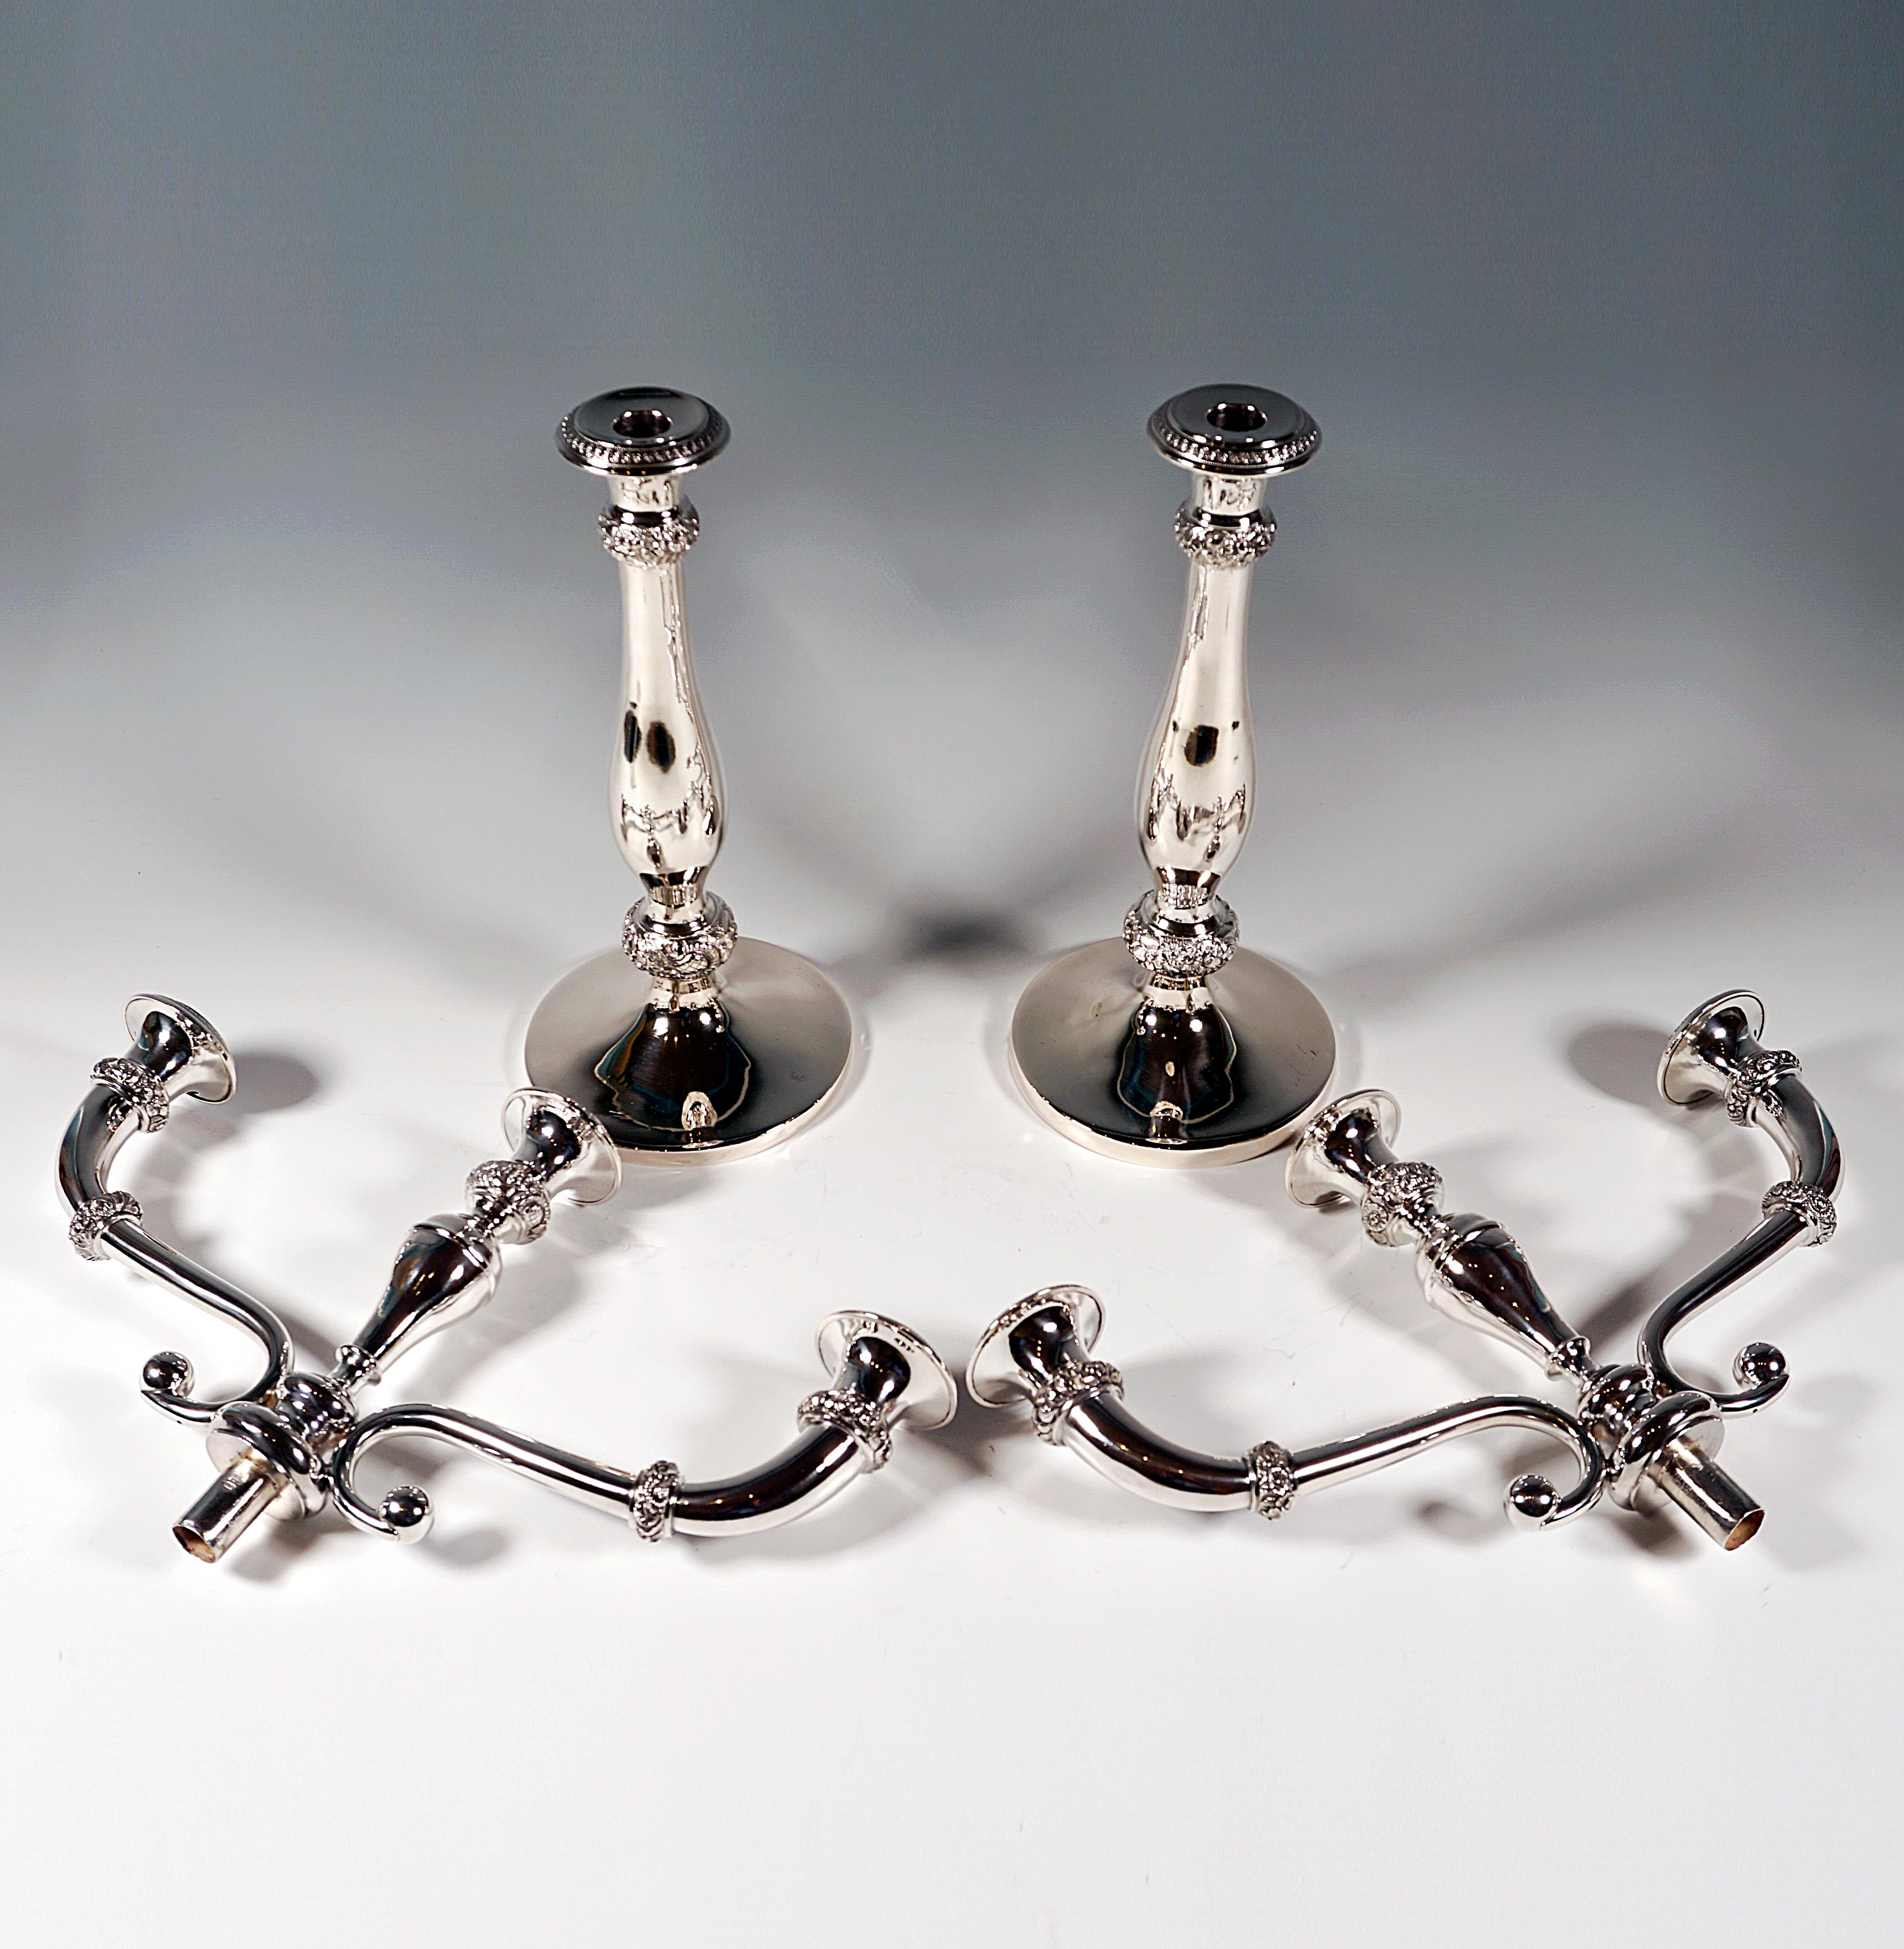 Hand-Crafted Pair of Antique Vienna 3-Flame Silver Candelabras by Carl Isack, 1840